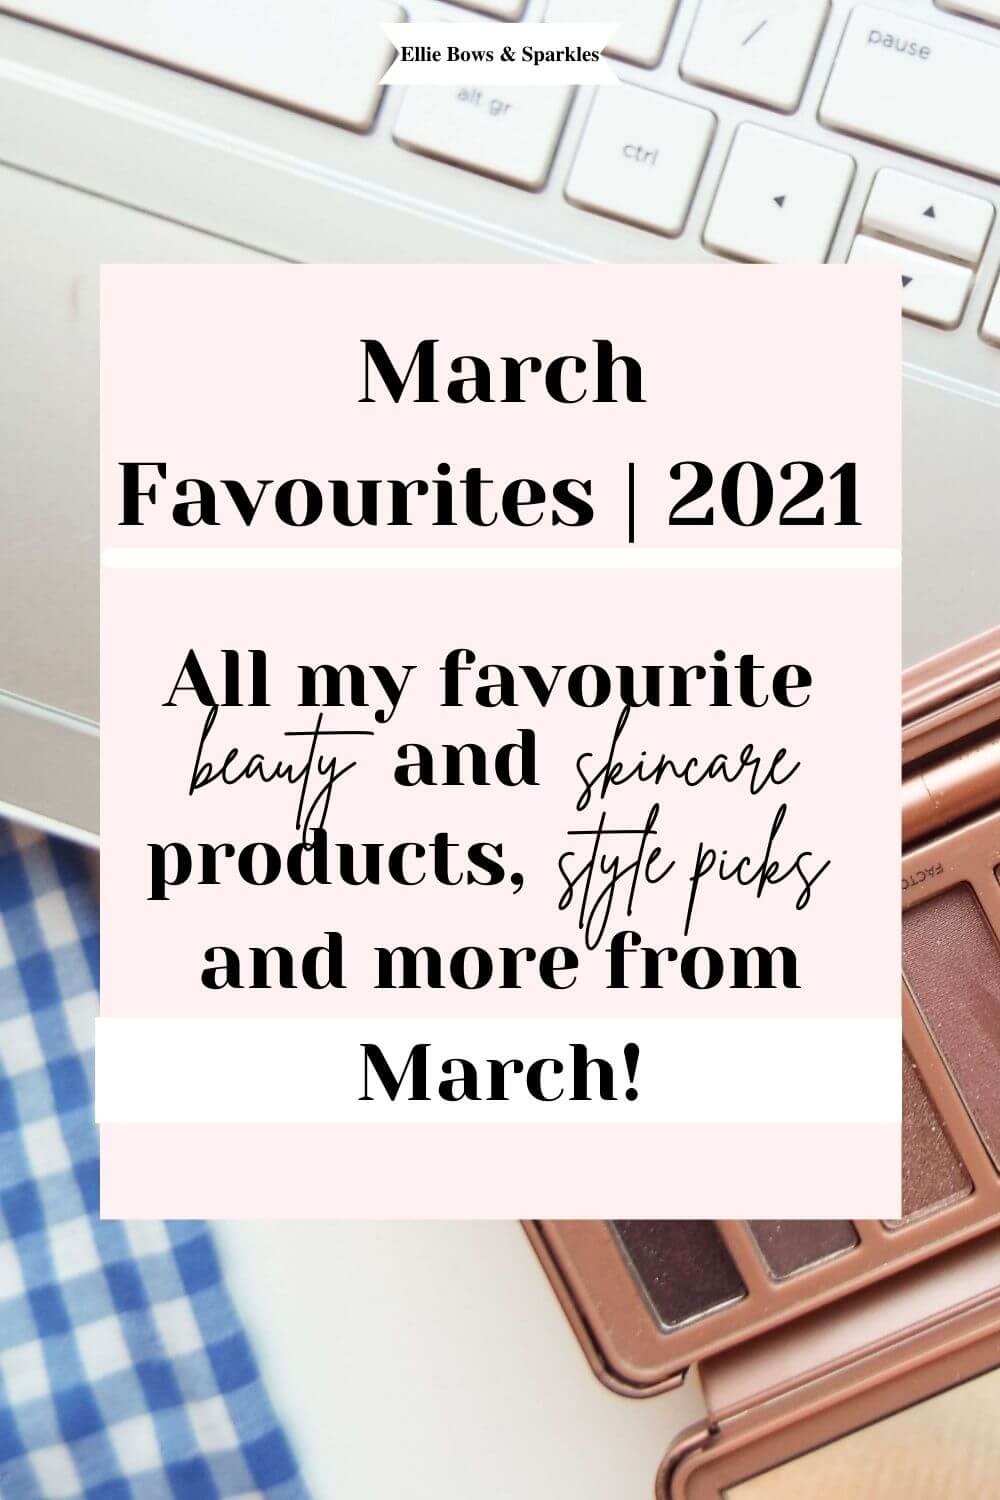 Pinterest pin, with original coloured close up picture of Urban Decay Naked 3 Palette to the background, with a pink title card and mixture of bold and hand written text, reading "March Favourites |2021 All my favourite beauty and skincare products, style picks and more from March!".